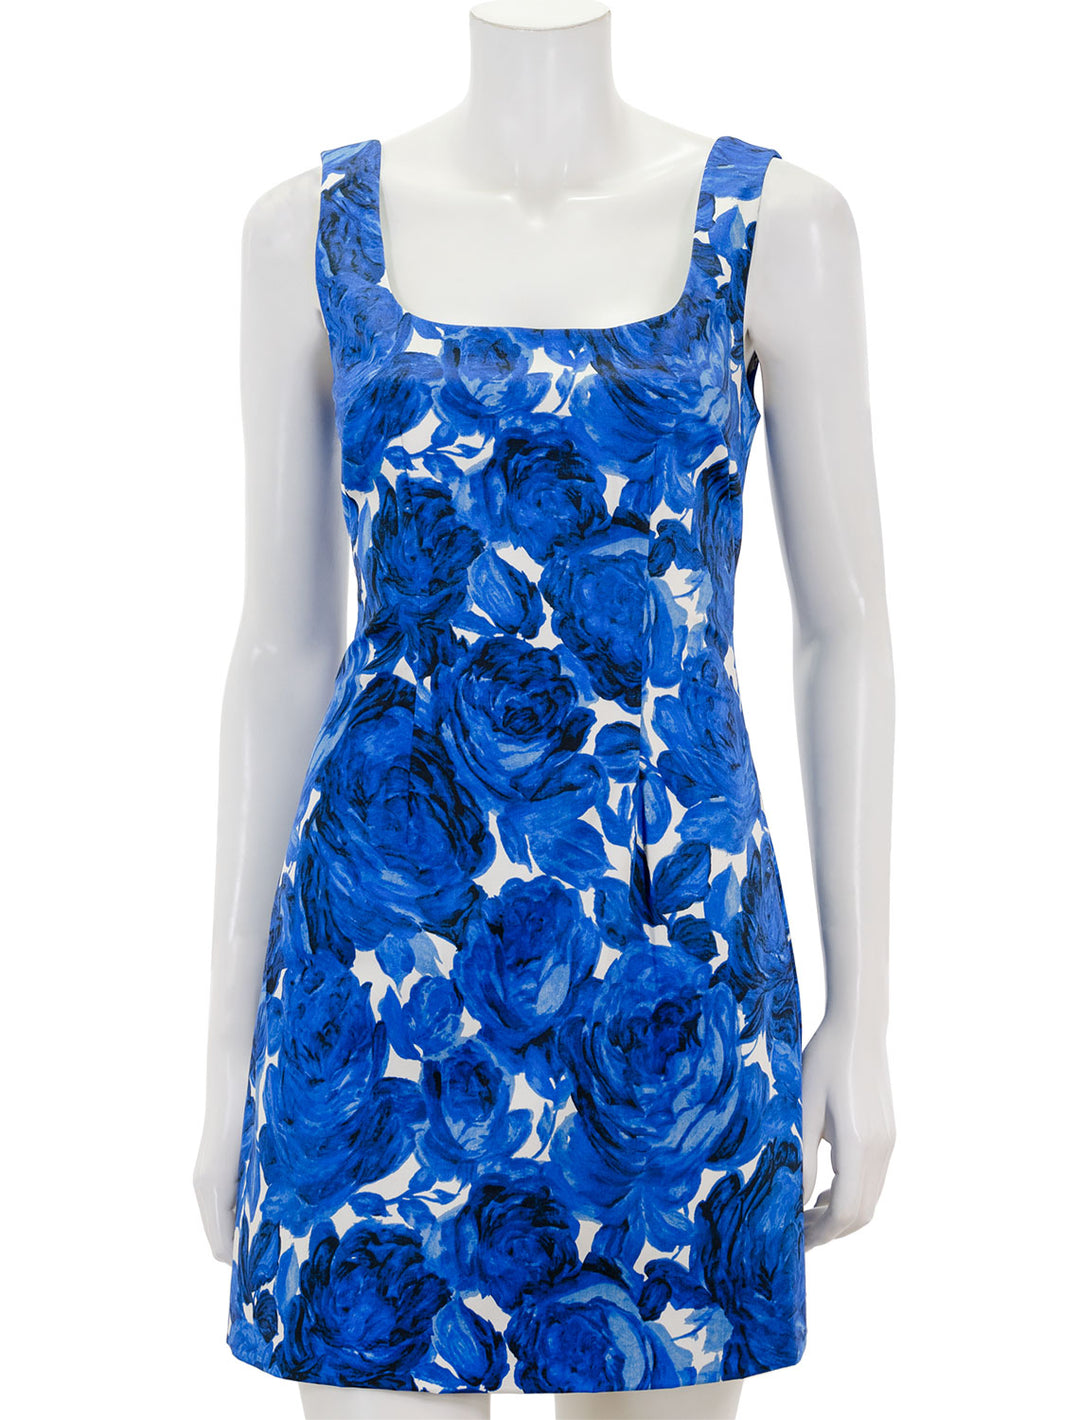 Front view of Cara Cara's sandra dress in floral garden blue.